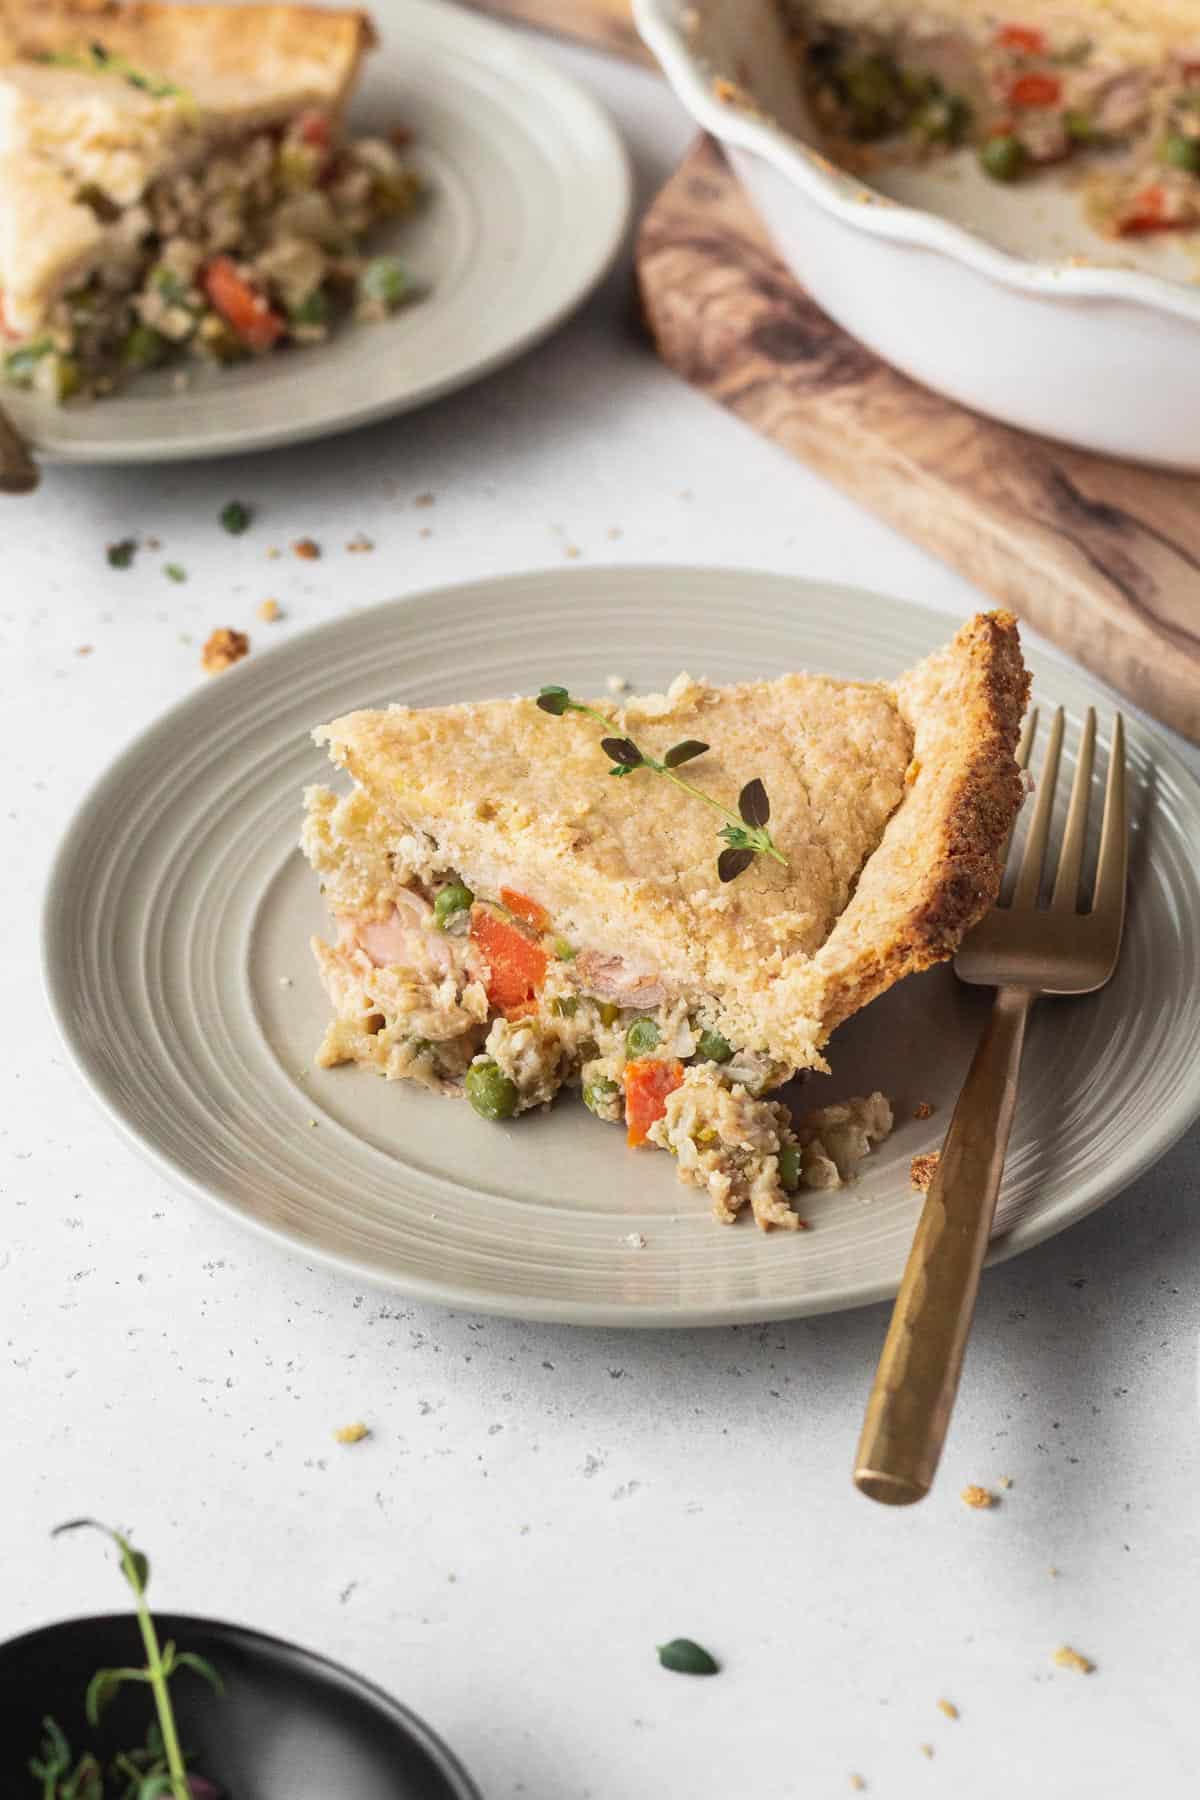 A slice of vegan pot pie on a plate with a gold fork.